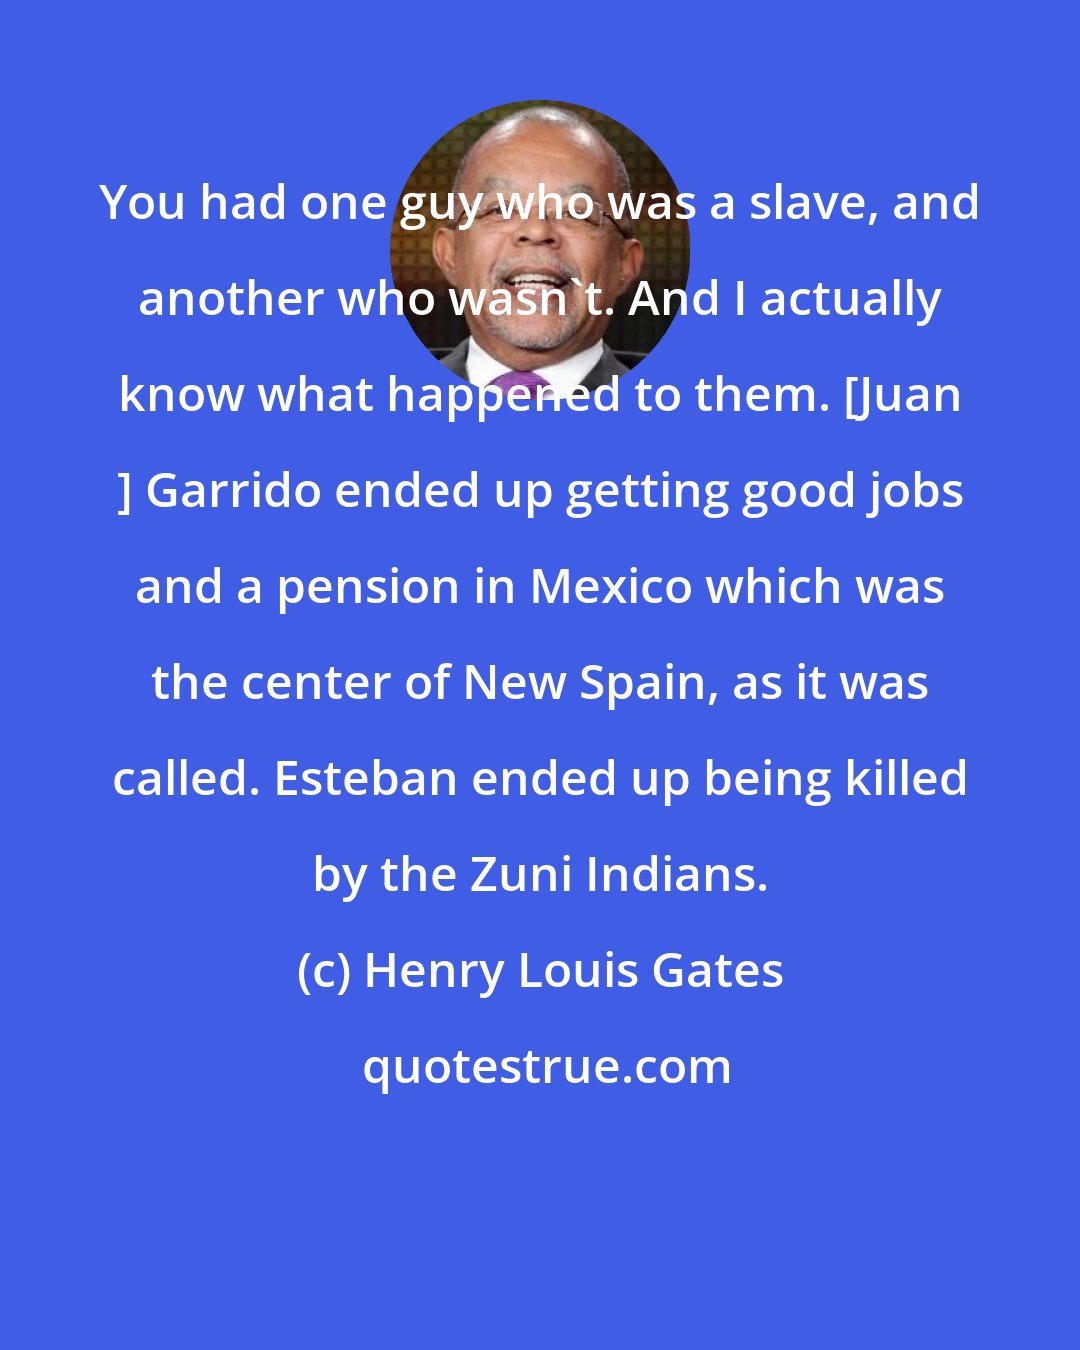 Henry Louis Gates: You had one guy who was a slave, and another who wasn't. And I actually know what happened to them. [Juan ] Garrido ended up getting good jobs and a pension in Mexico which was the center of New Spain, as it was called. Esteban ended up being killed by the Zuni Indians.